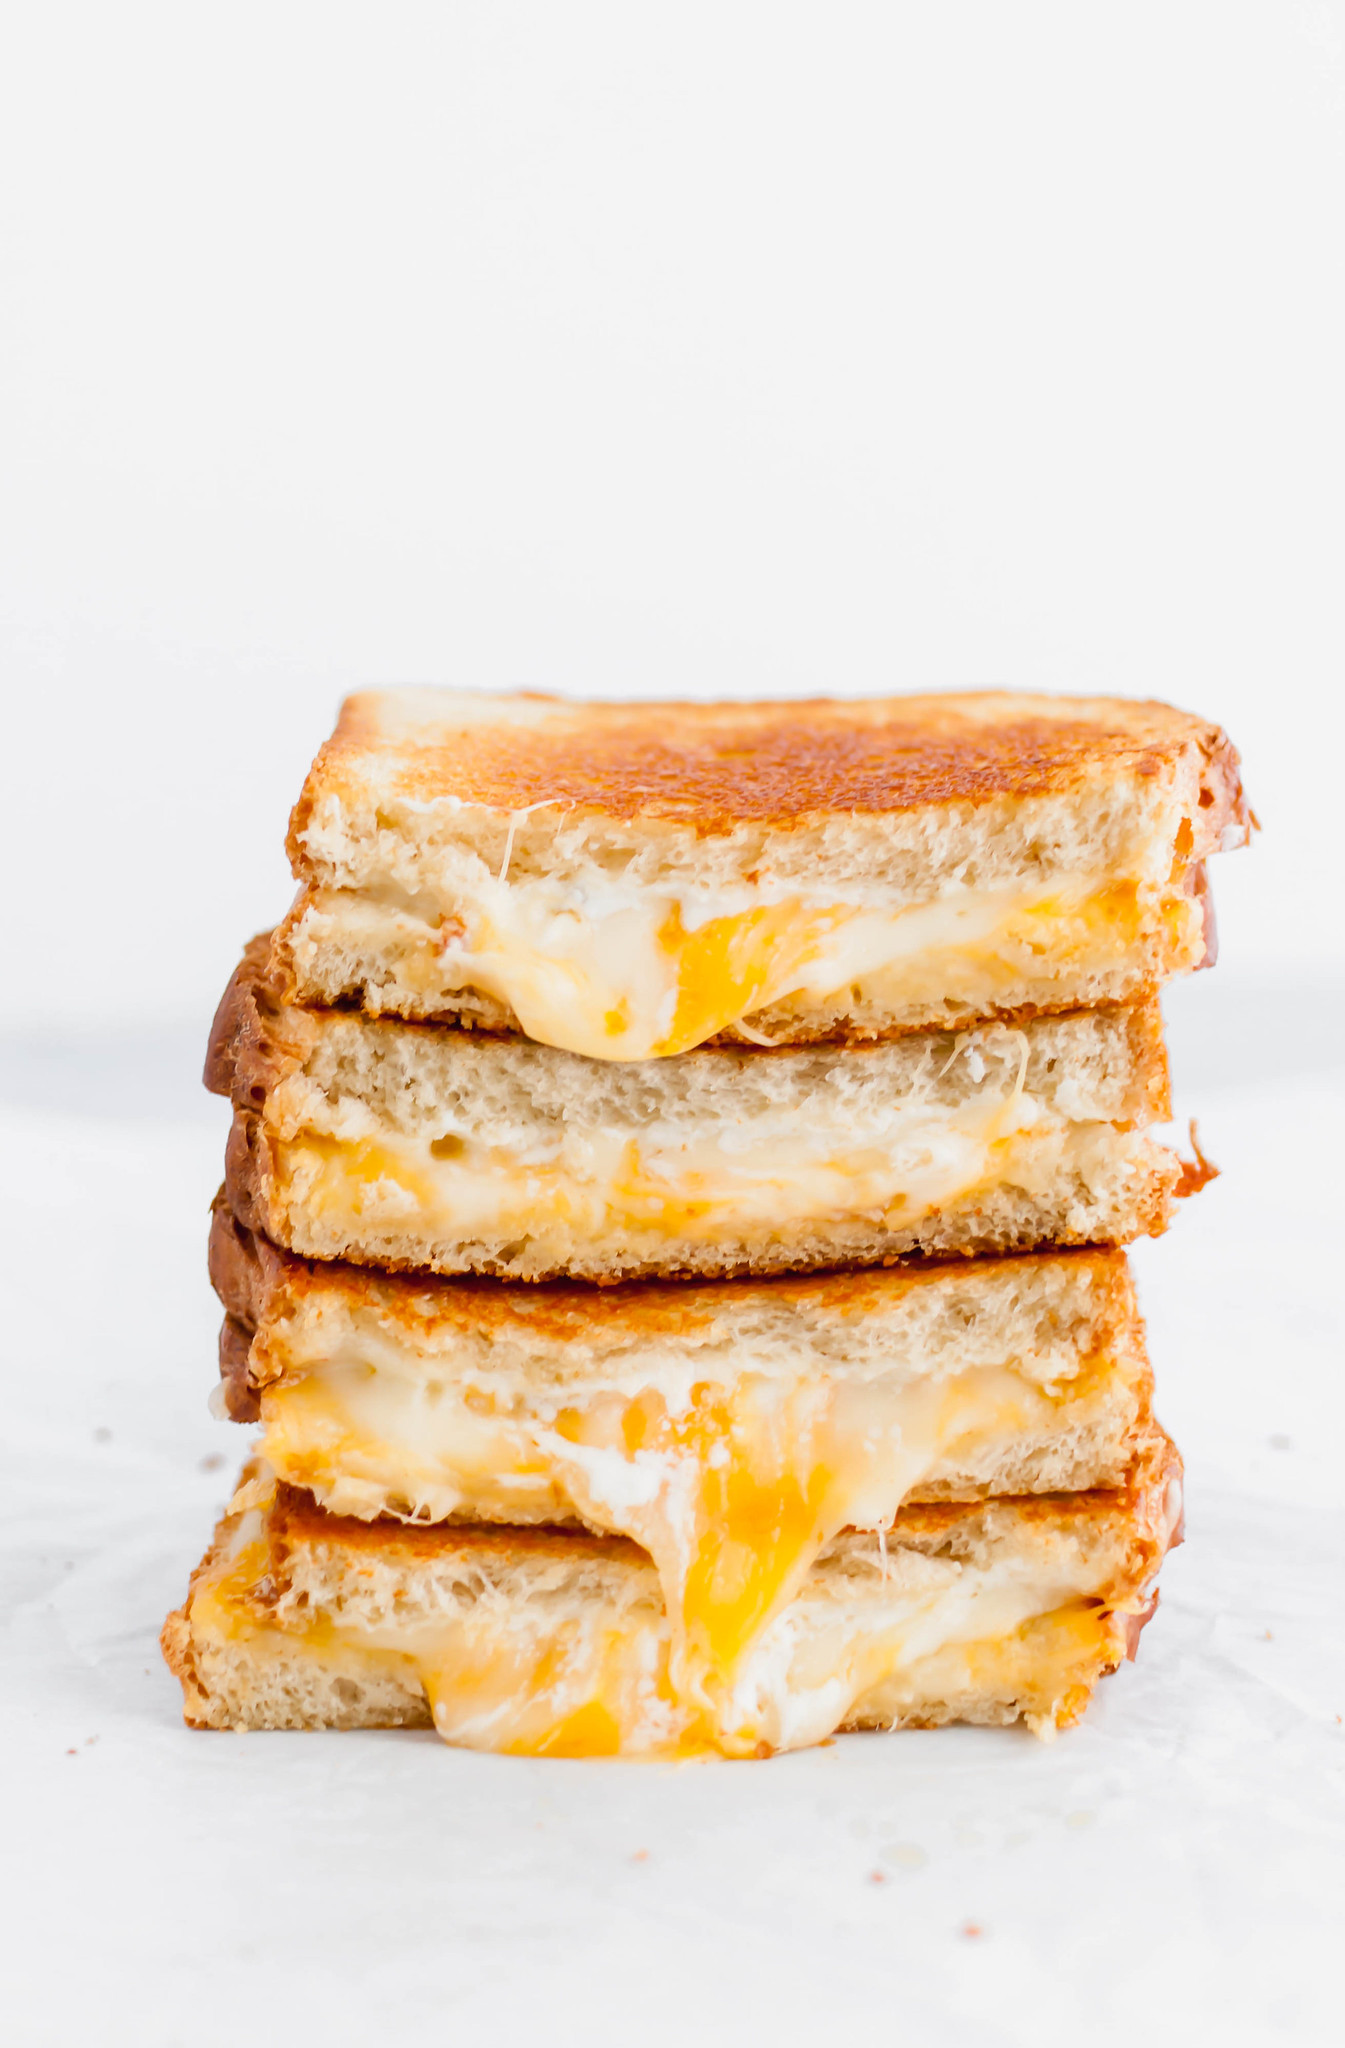 Get ready for the cheesiest grilled cheese of your life. This 4 Cheese Grilled Cheese is packed with a few favorites and a few surprises to make the ultimate sandwich.